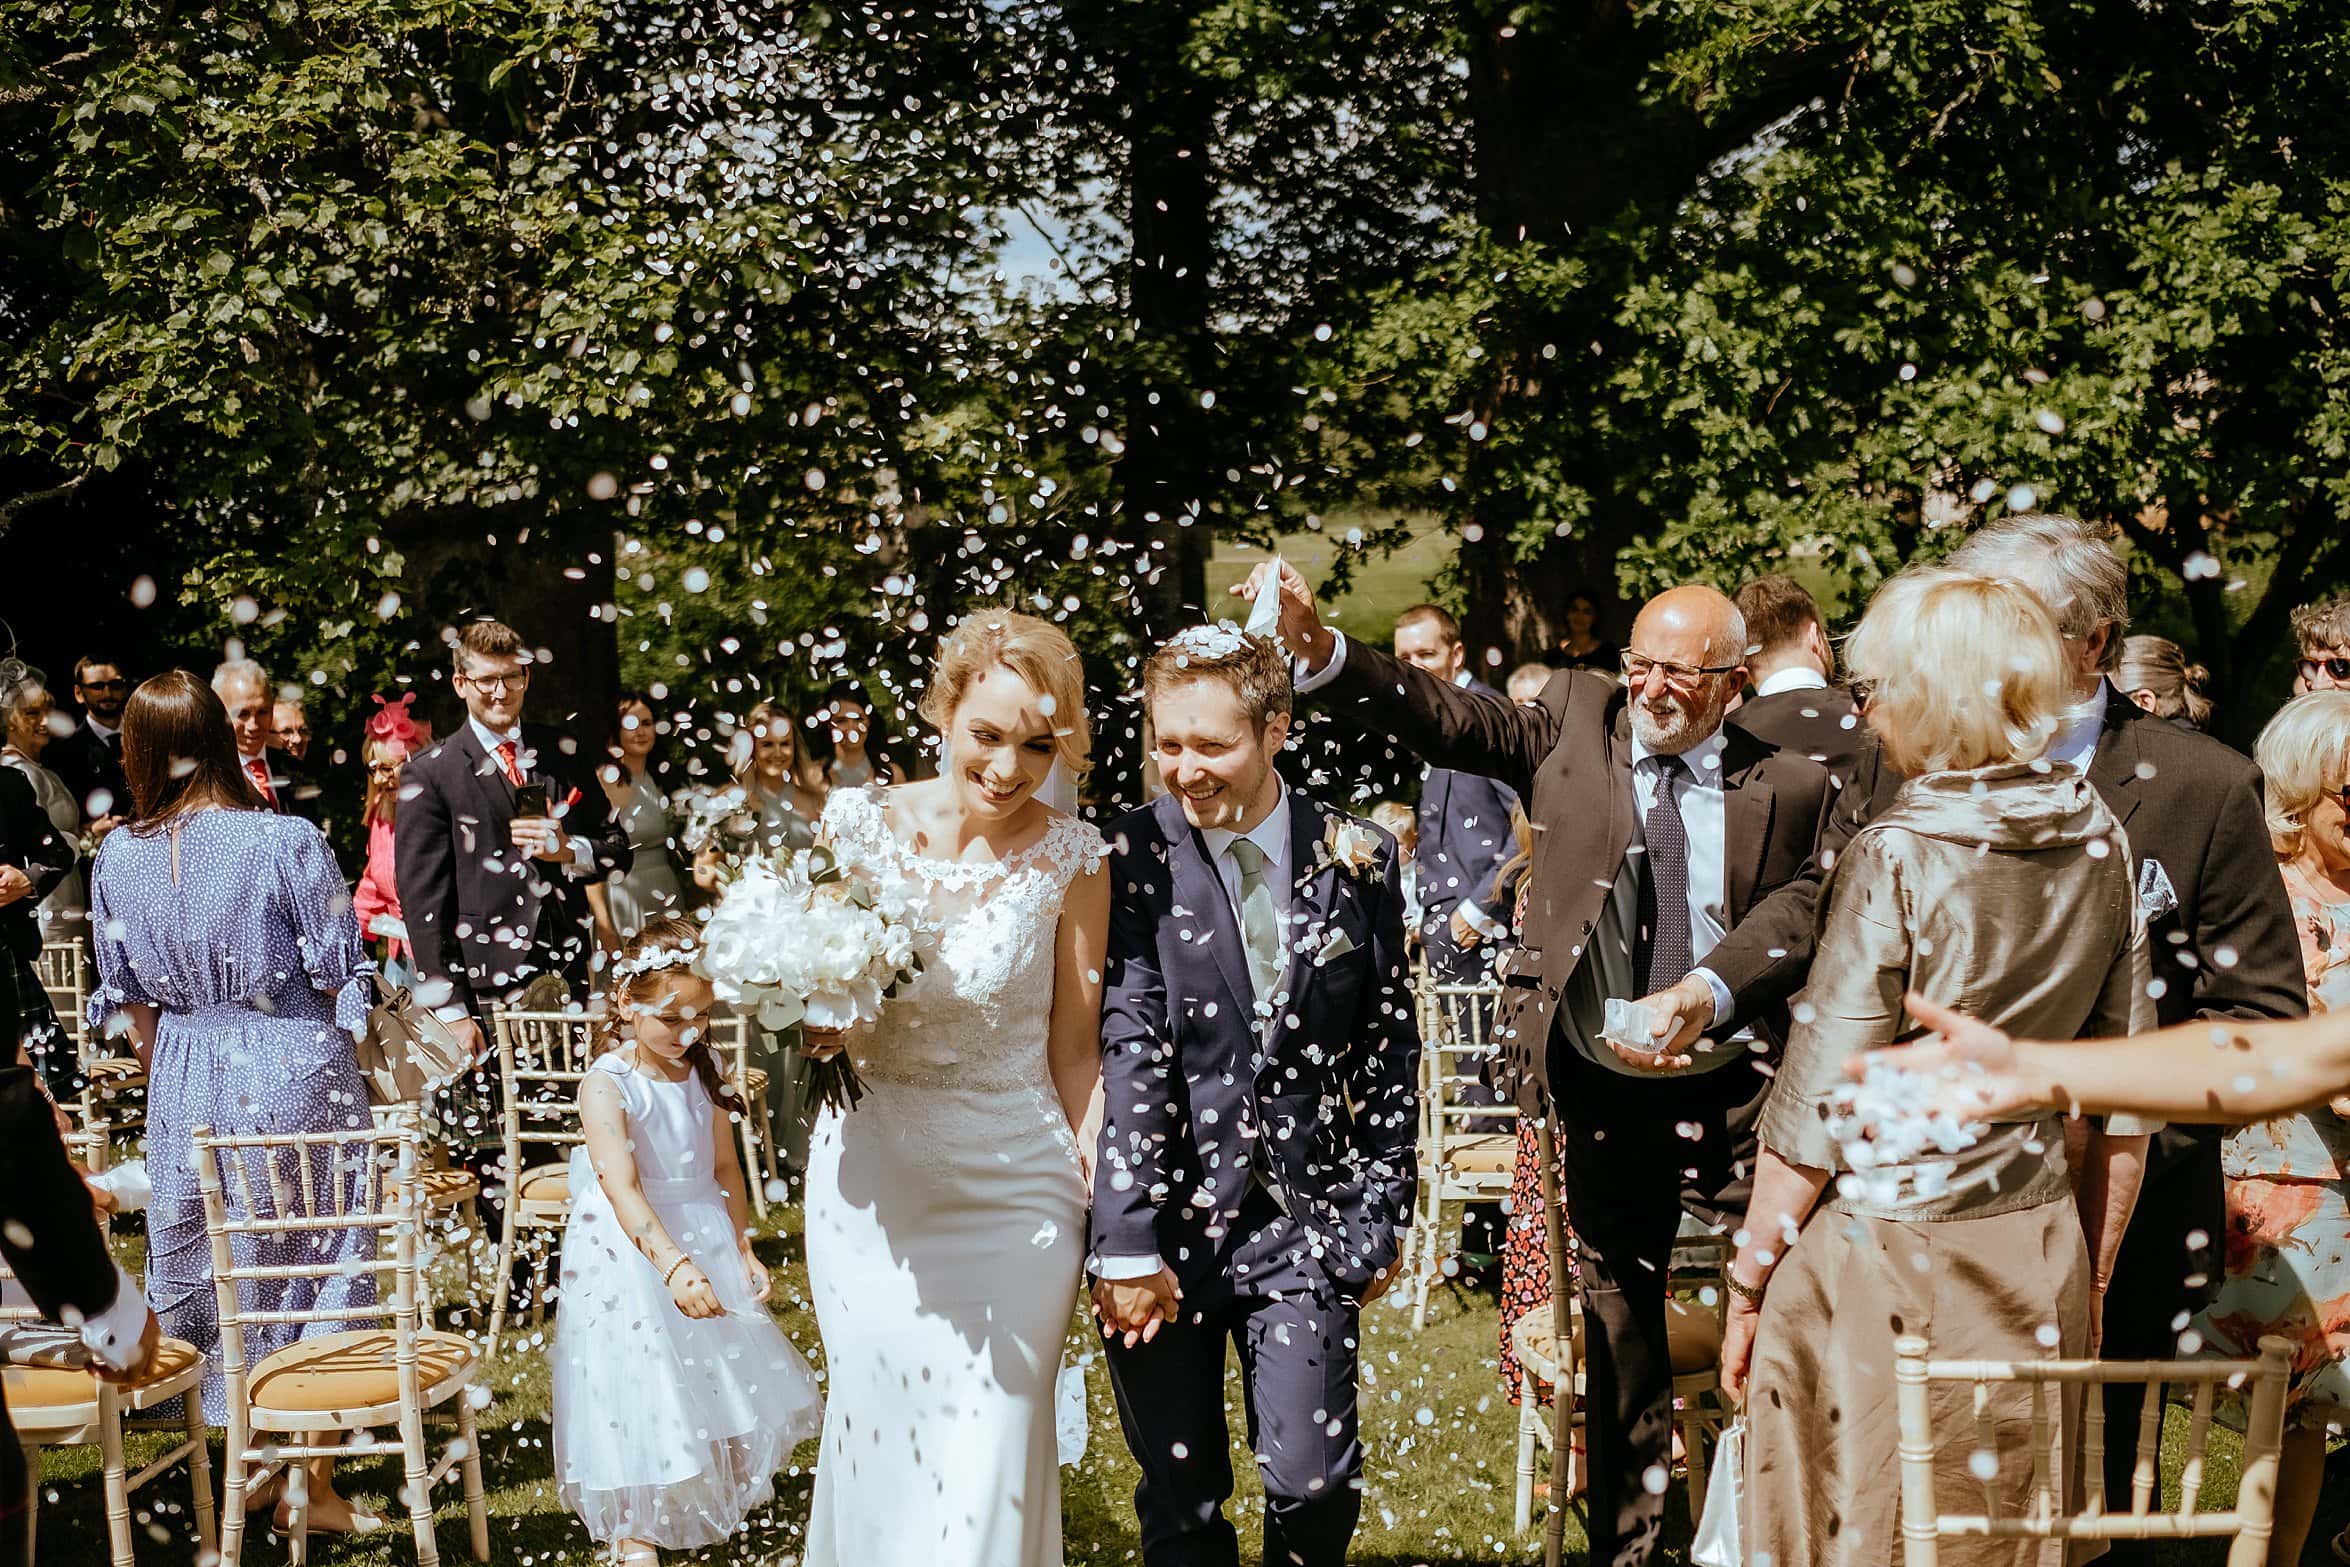 just married bride and groom walking back down the aisle as guests shower them in confetti on sunny day exclusive use colstoun house wedding unique wedding venue scotland